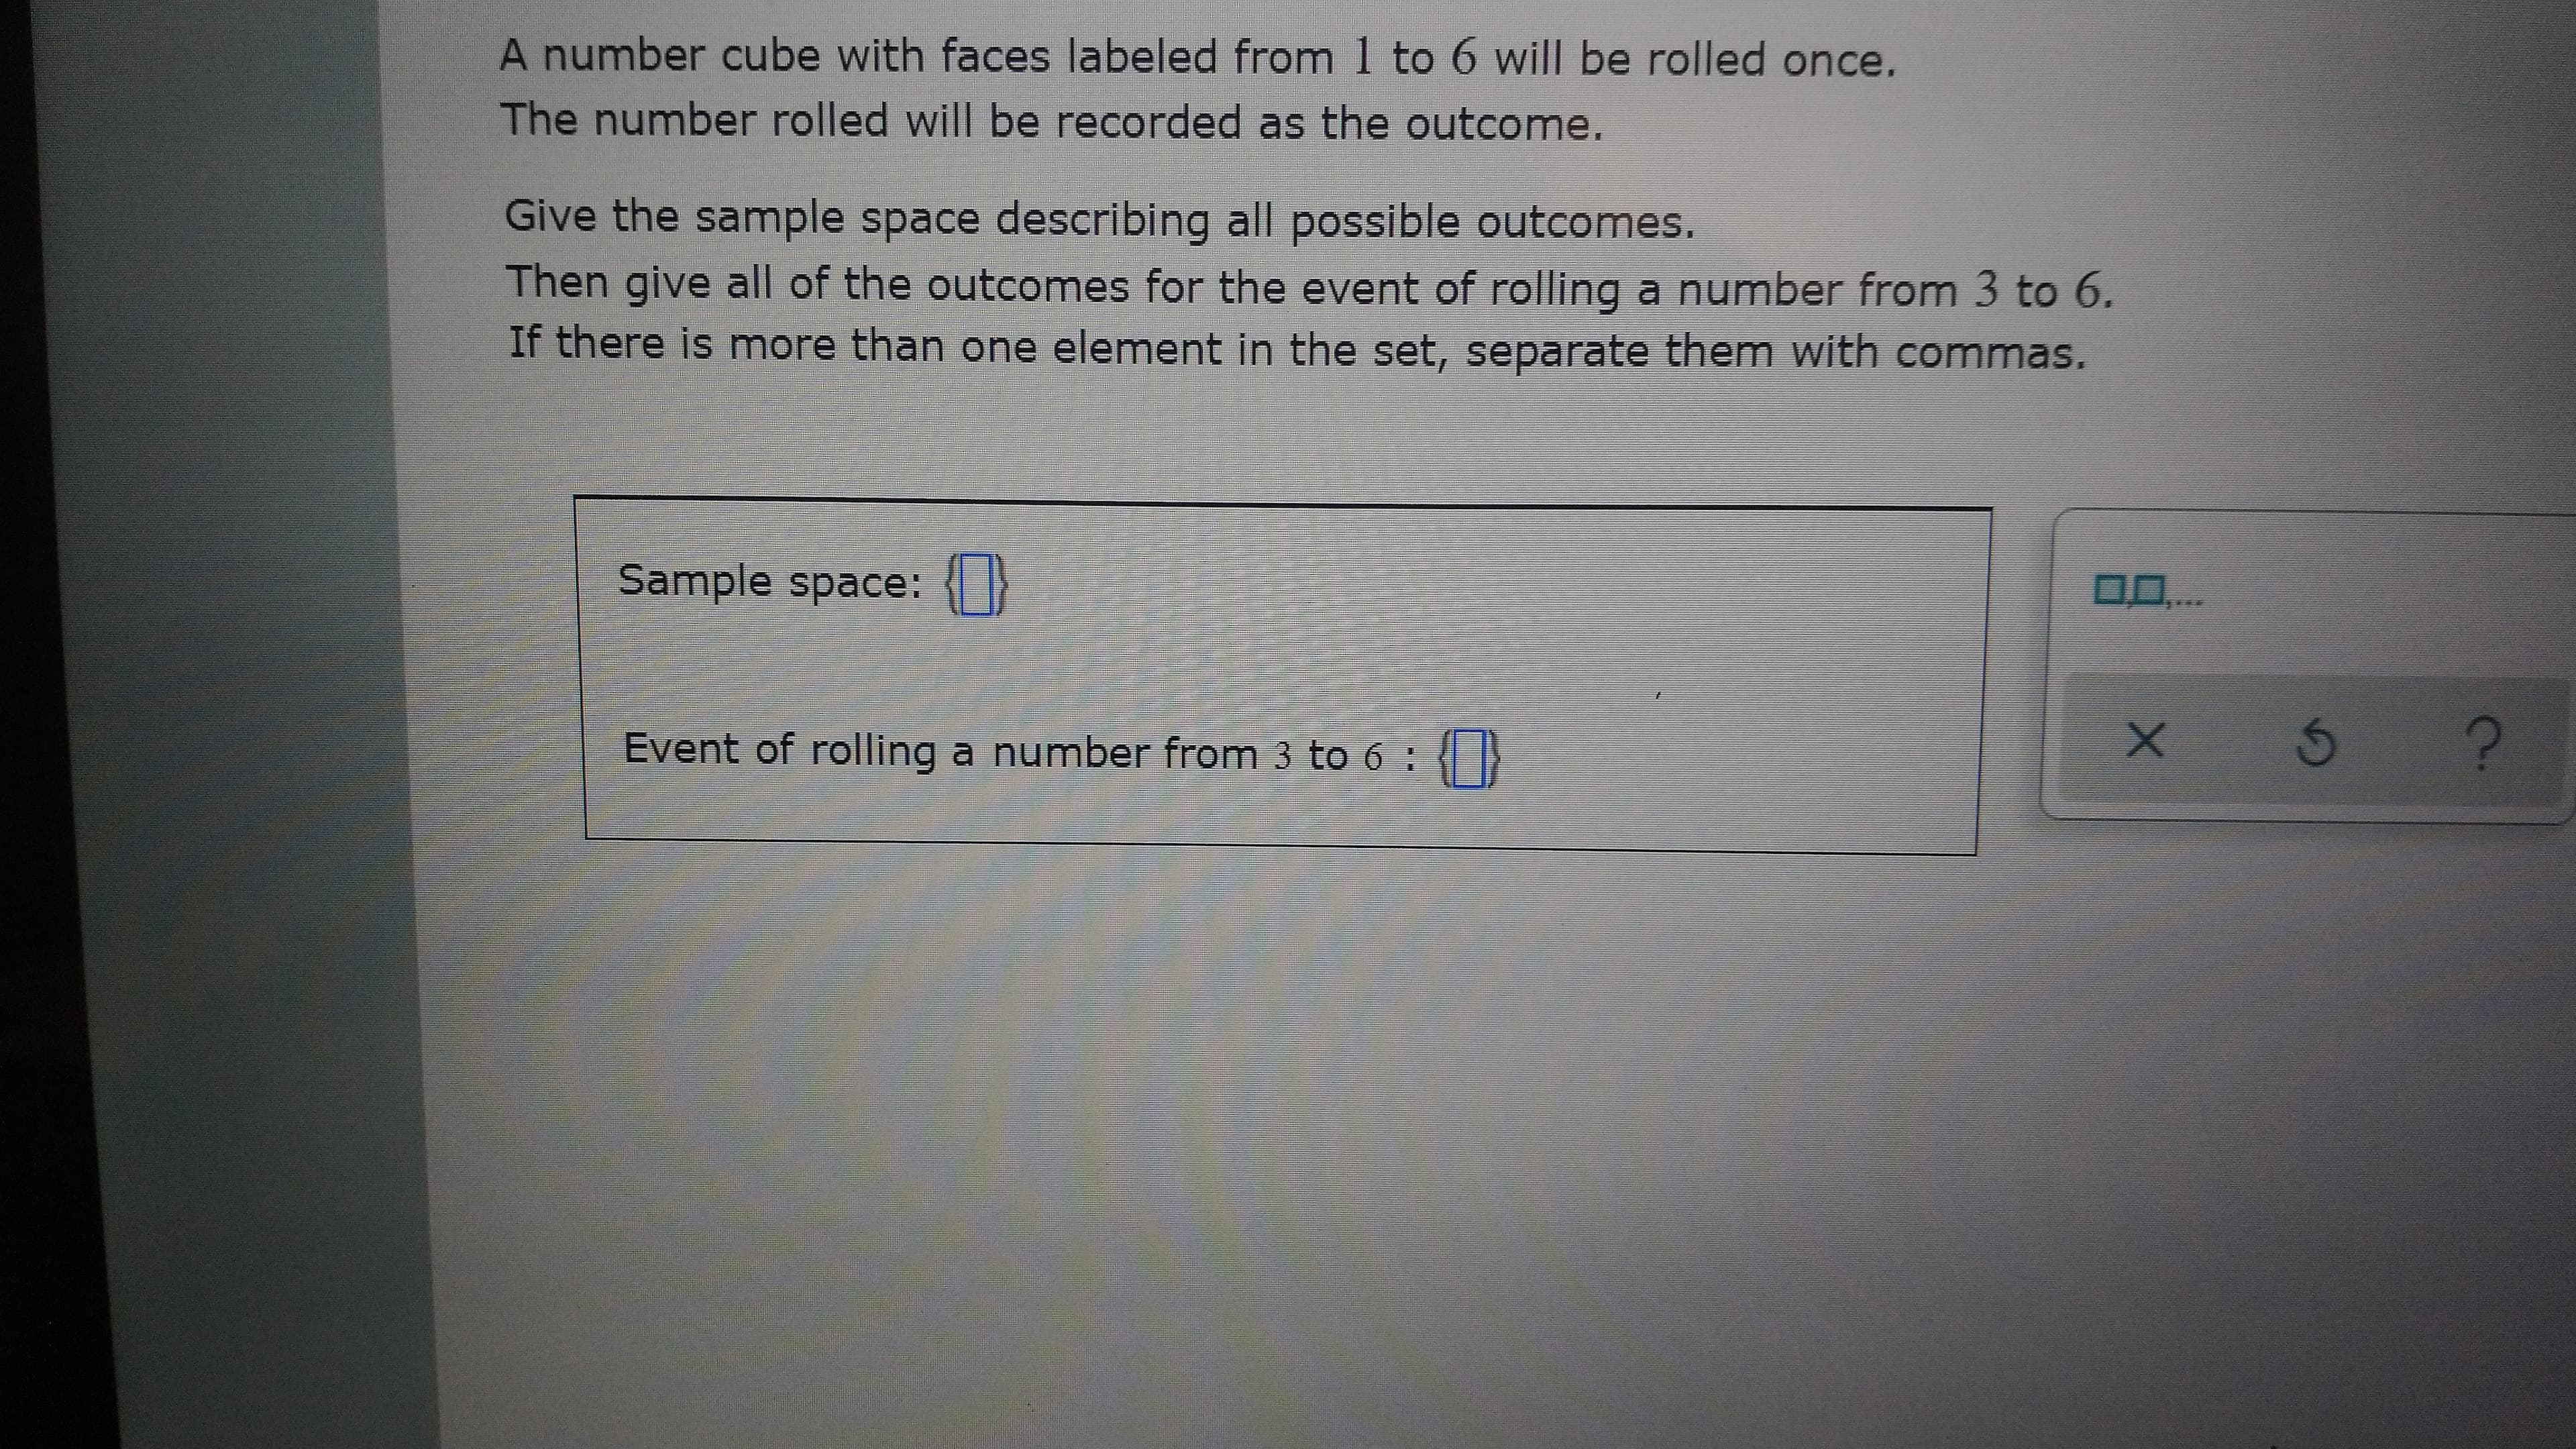 A number cube with faces labeled from 1 to 6 will be rolled once.
The number rolled will be recorded as the outcome.
Give the sample space describing all possible outcomes.
Then give all of the outcomes for the event of rolling a number from 3 to 6.
If there is more than one element in the set, separate them with commas.
Sample space: }
Event of rolling a number from 3 to 6 :
